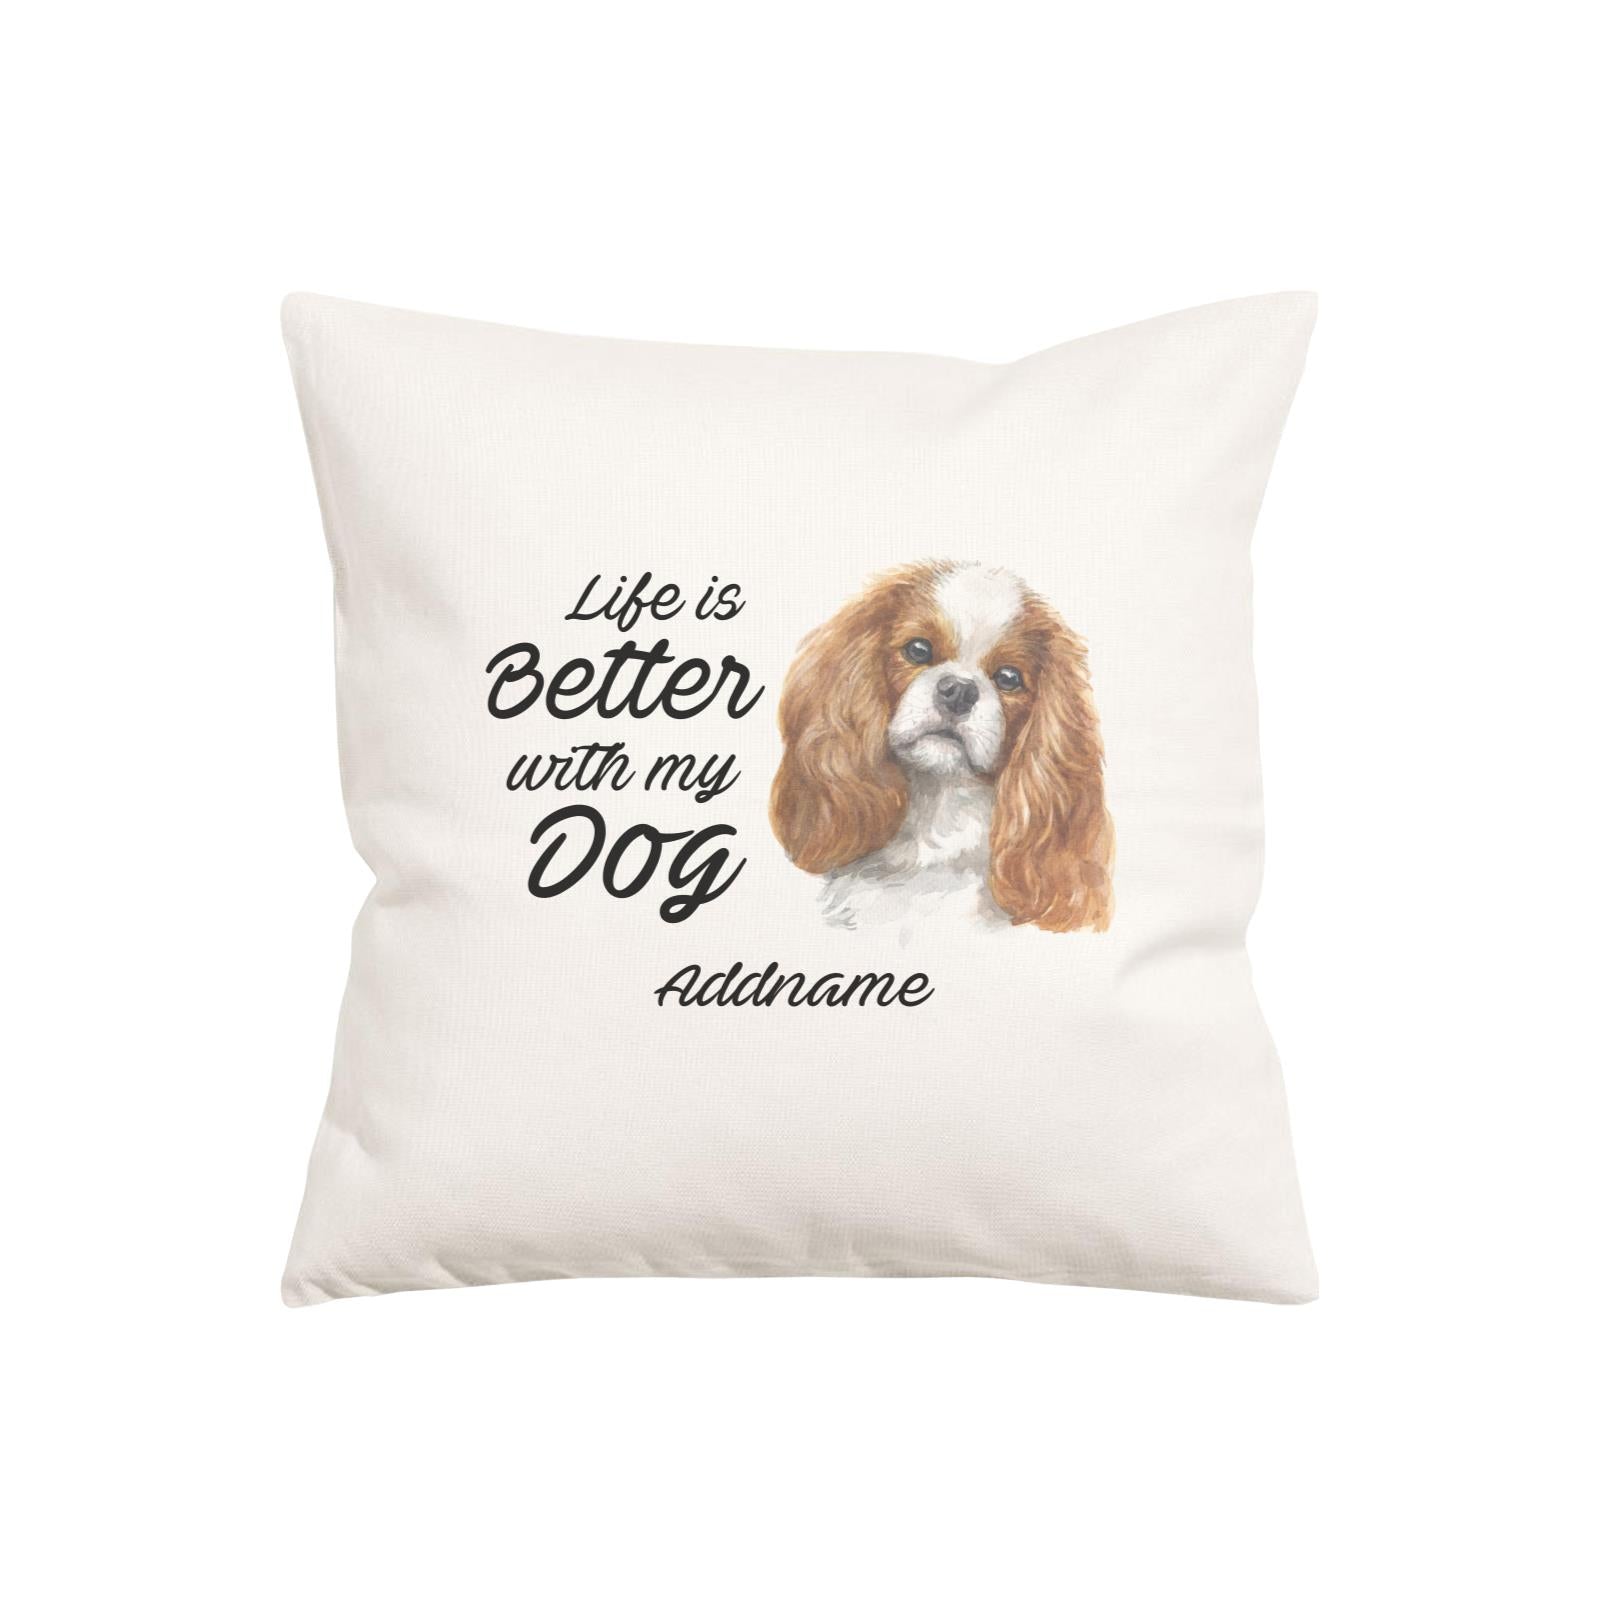 Watercolor Life is Better With My Dog King Charles Spaniel Curly Addname Pillow Cushion